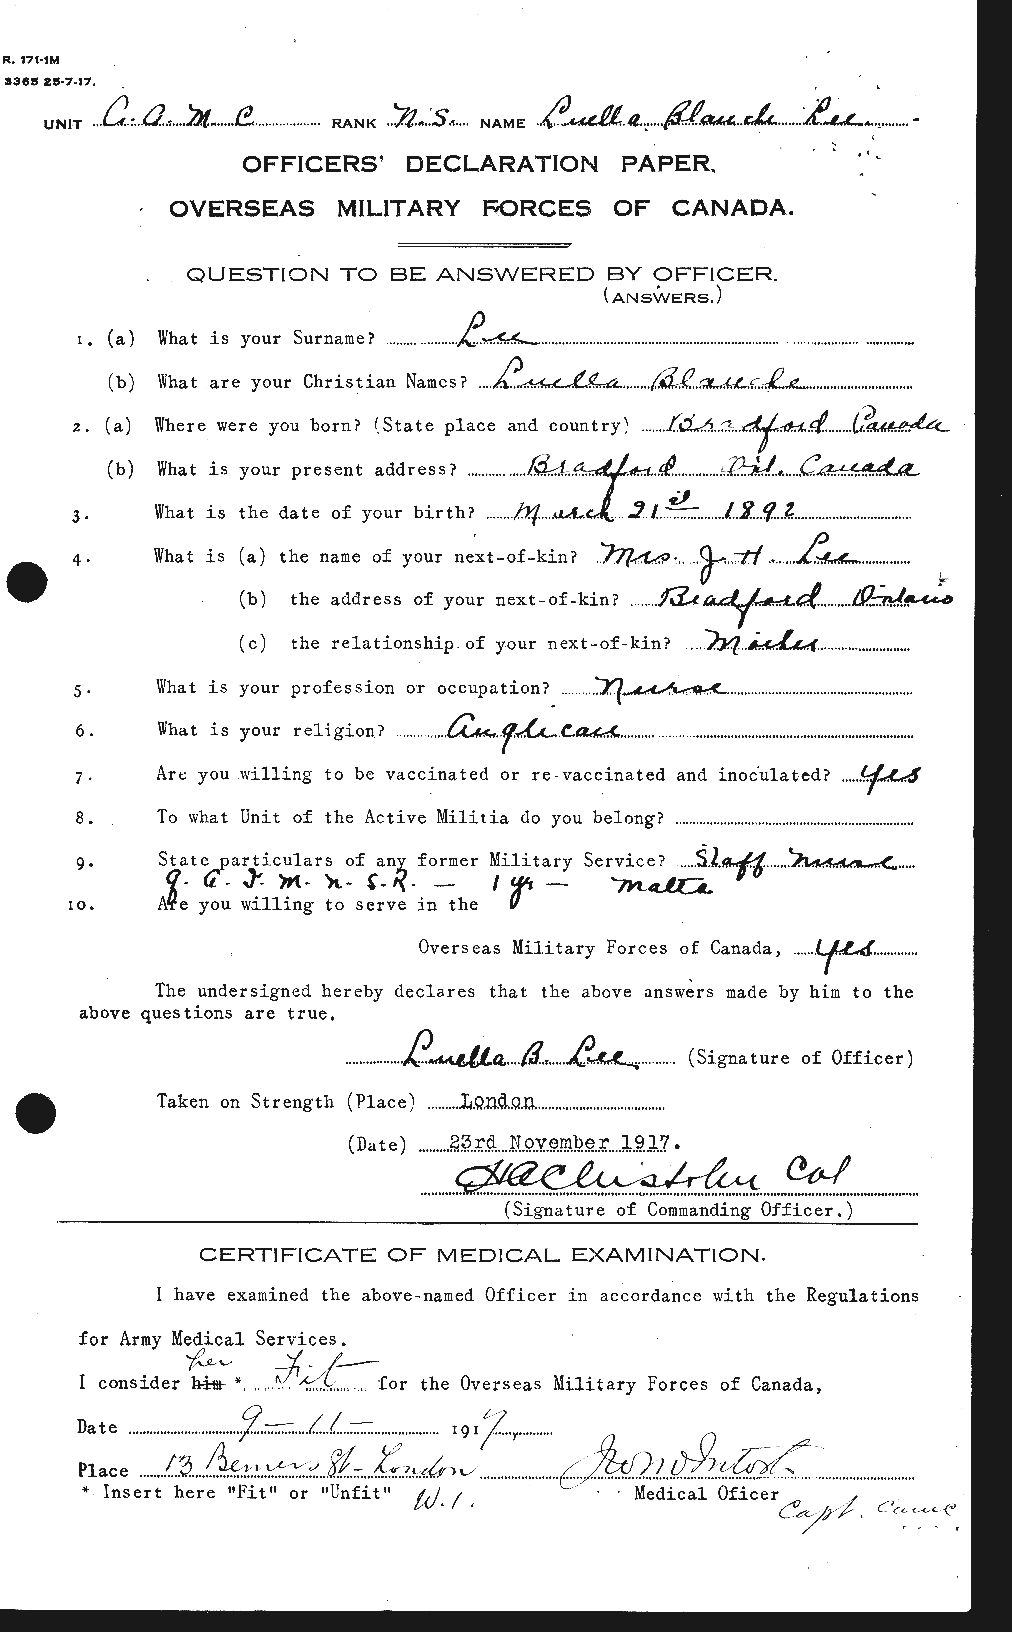 Personnel Records of the First World War - CEF 458911a